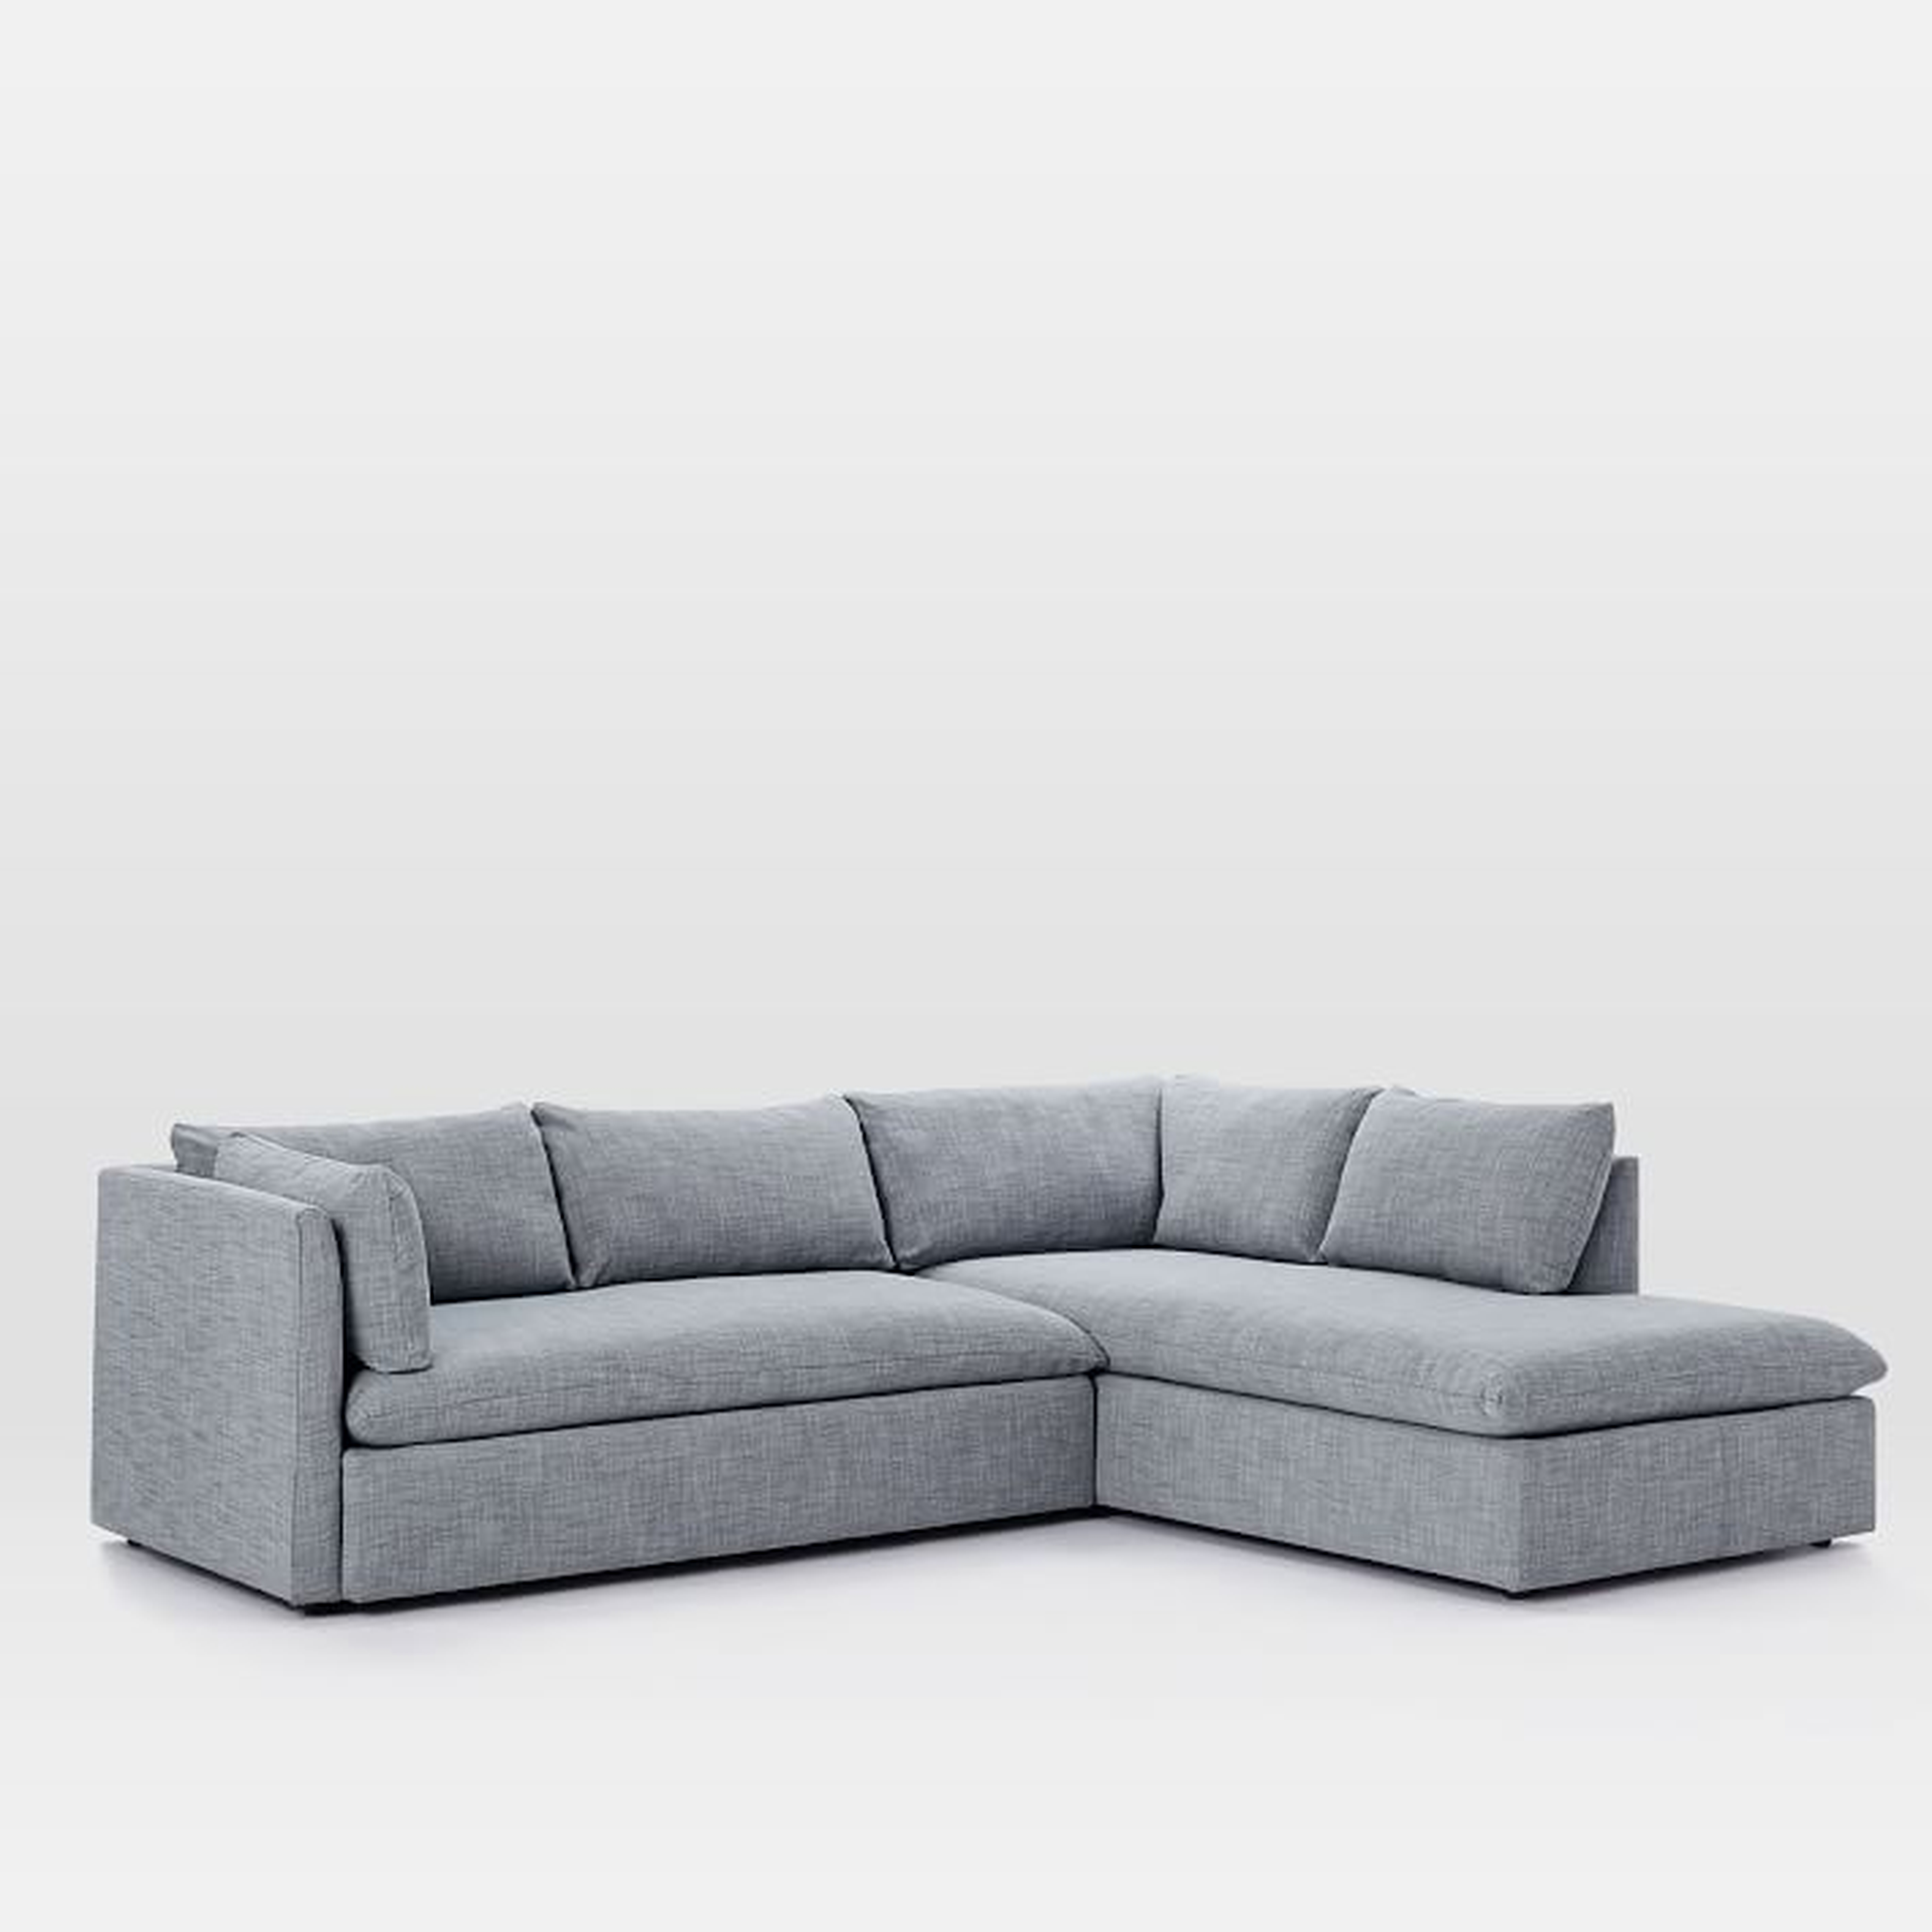 Shelter Sectional Set 06: Left Arm Sleeper Sofa, Right Arm Storage Chaise, Poly, Yarn Dyed Linen Weave, Graphite, Concealed Supports - West Elm